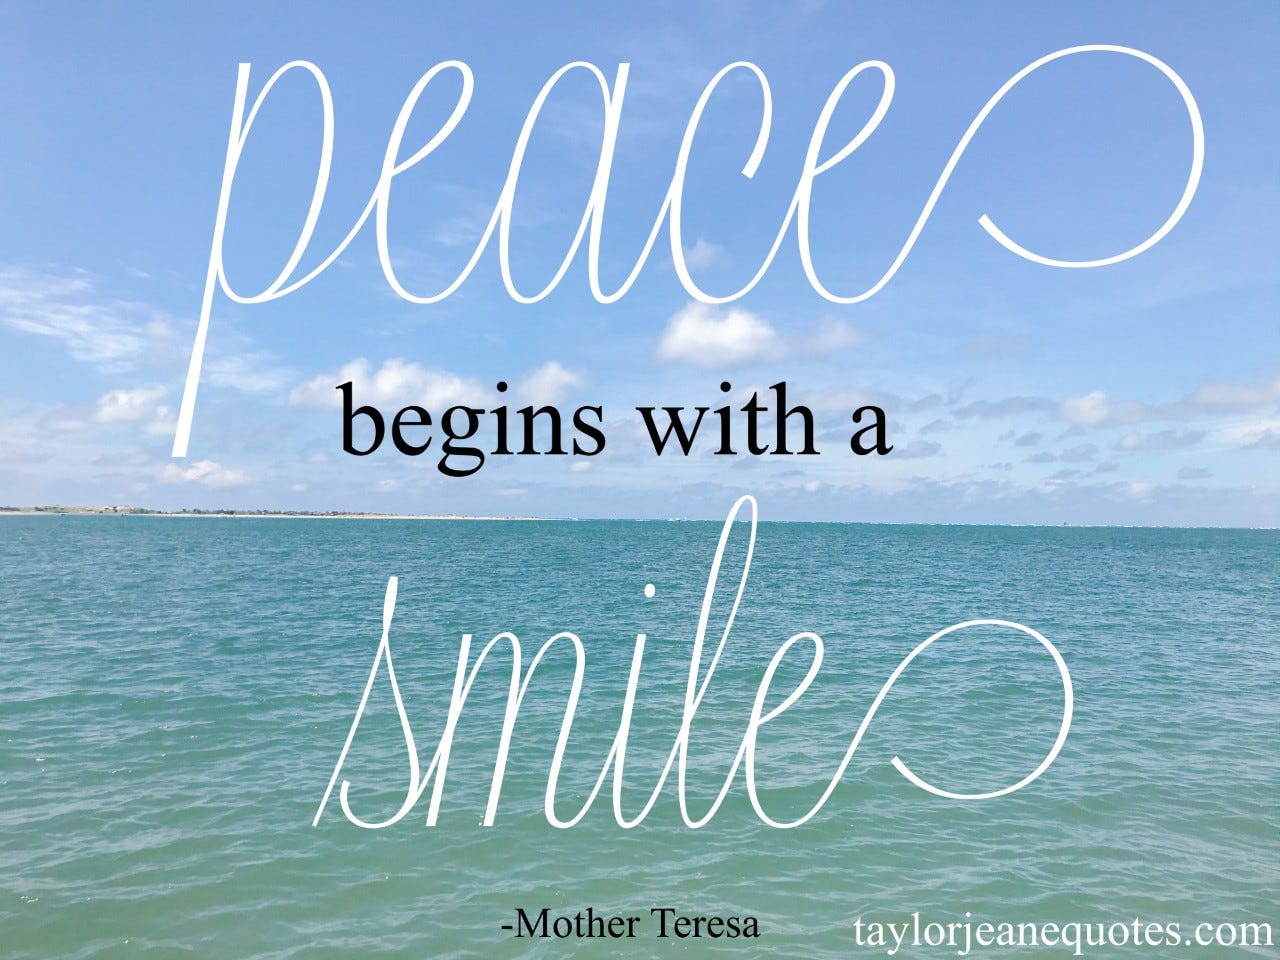 taylor jeane quotes, quote of the day, mother teresa quotes, uplifting quotes, happy quotes, peace quotes, life quotes, inspirational quotes, quote of the day, world peace, mother teresa, positive quotes